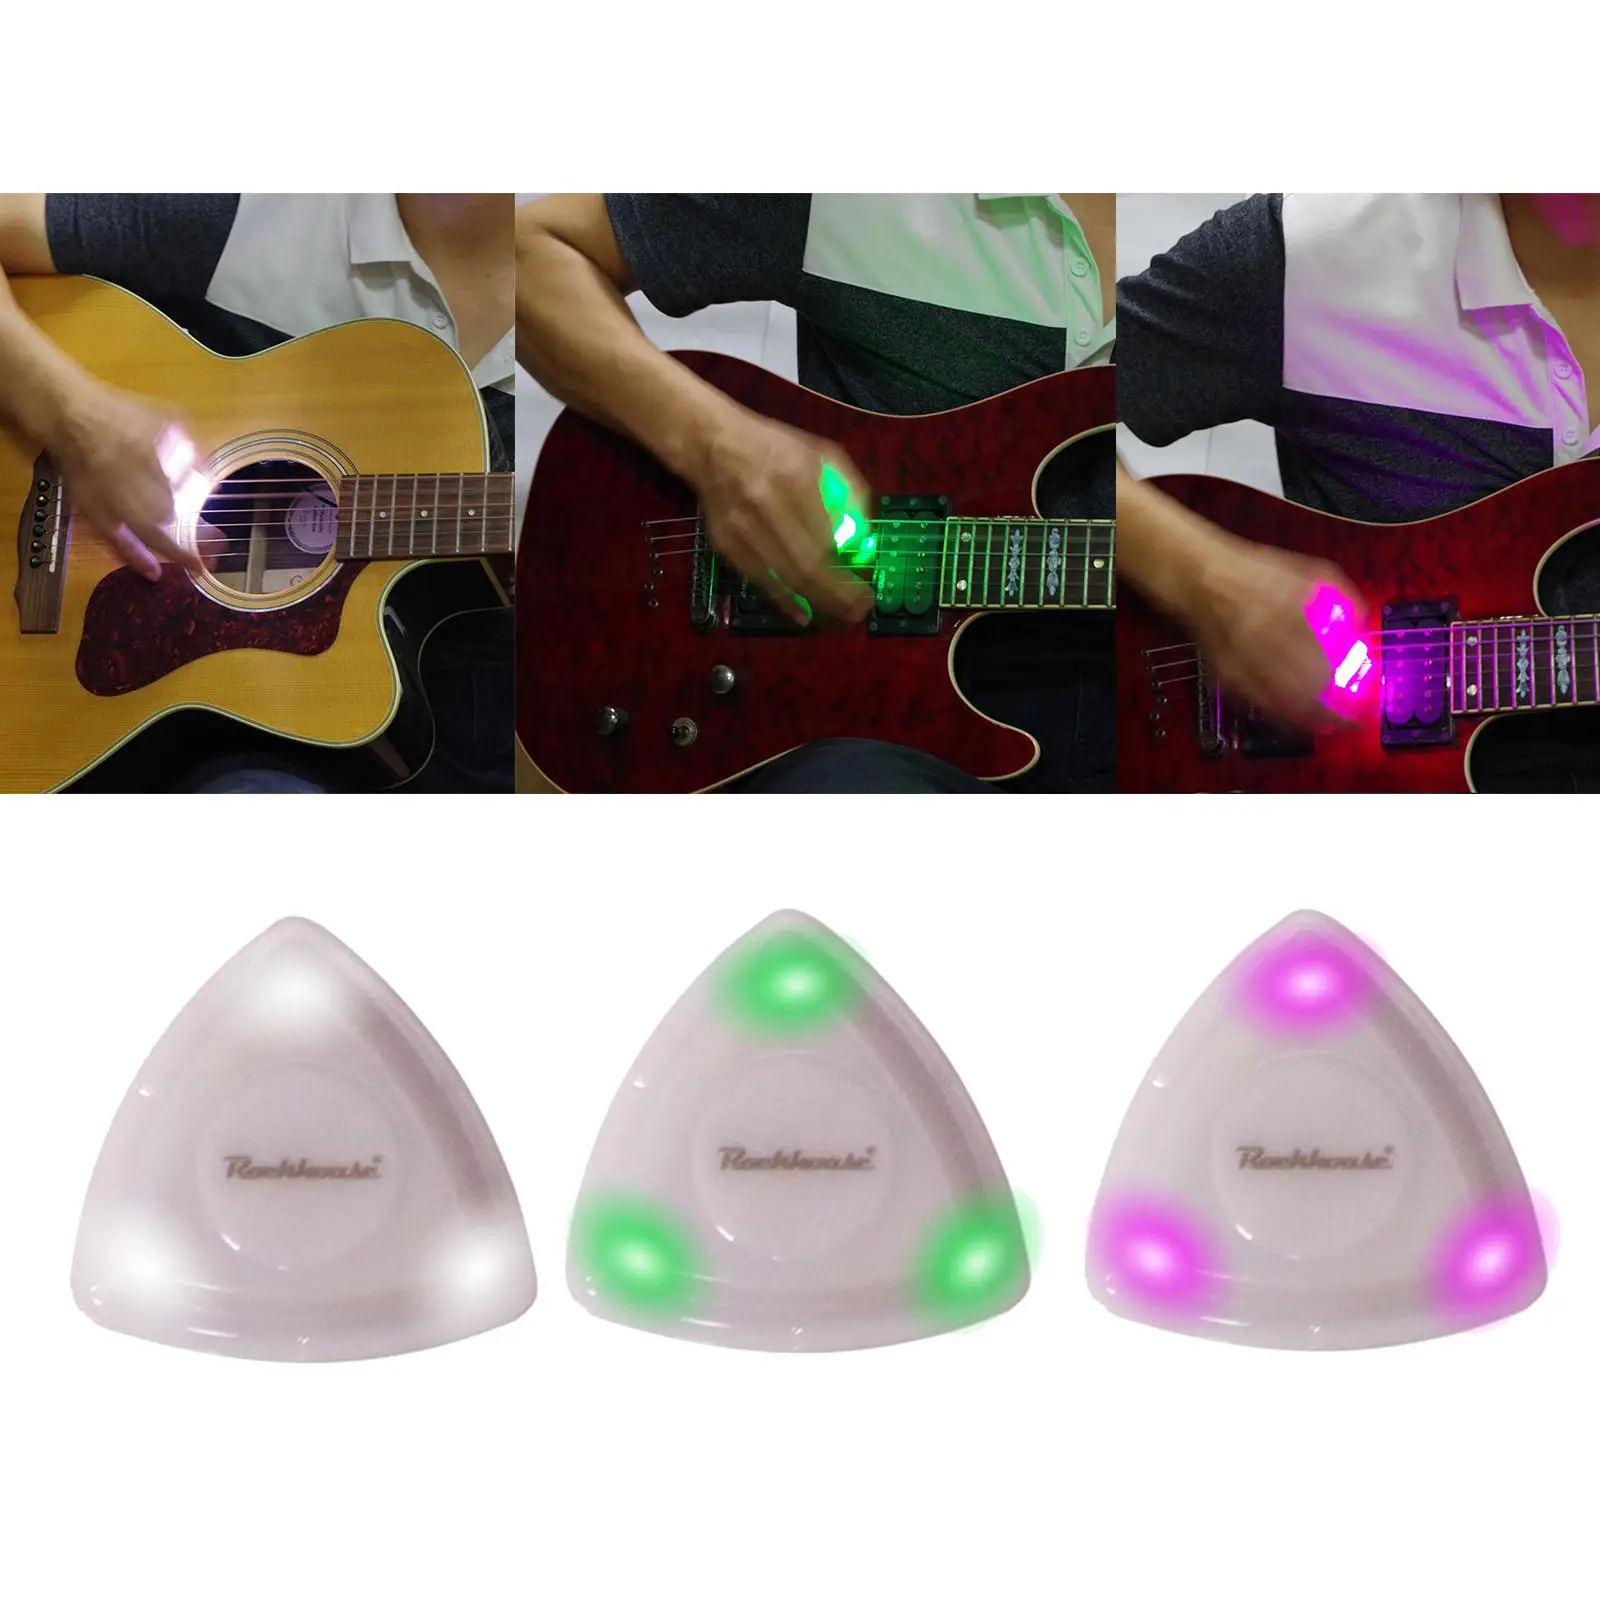 Unique Guitar Picks Medium Picks Plastic with LED Light, White/Green/ Guitar  for Bass Electric Guitar Acoustic guitarists